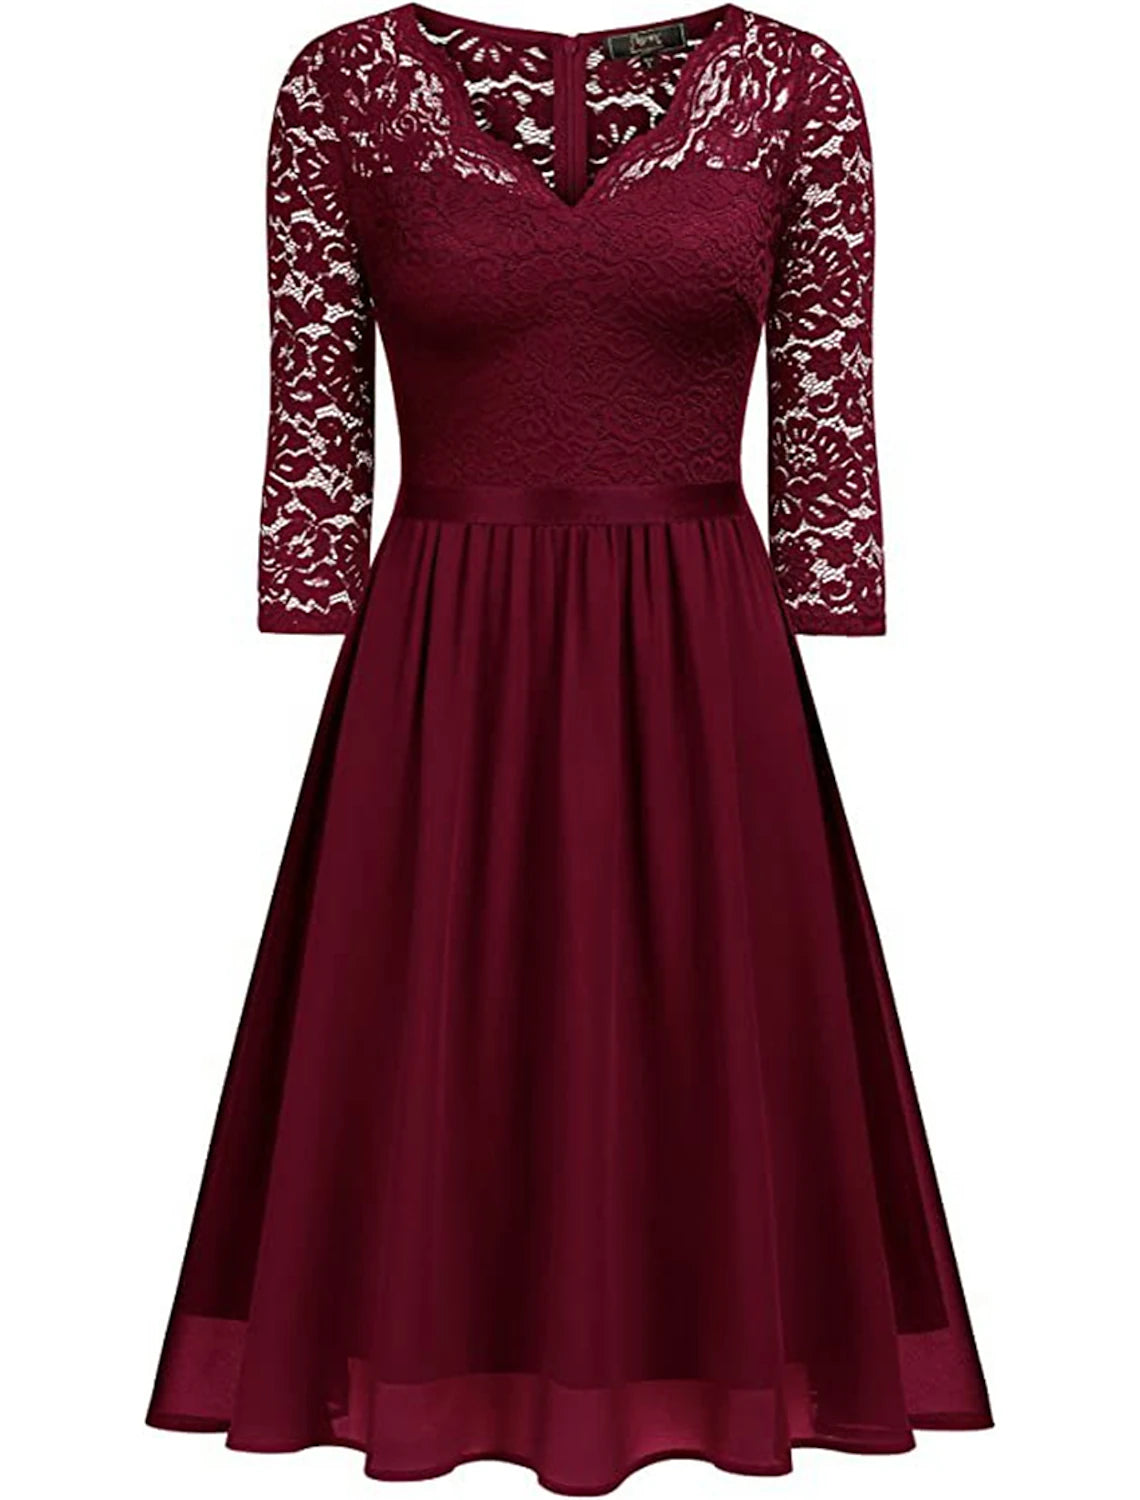 Women's Party Dress Lace Dress Homecoming Dress Midi Dress Black Wine Navy Blue Half Sleeve Pure Color Lace Spring Fall Winter V Neck Fashion Wedding Guest Birthday Vacation